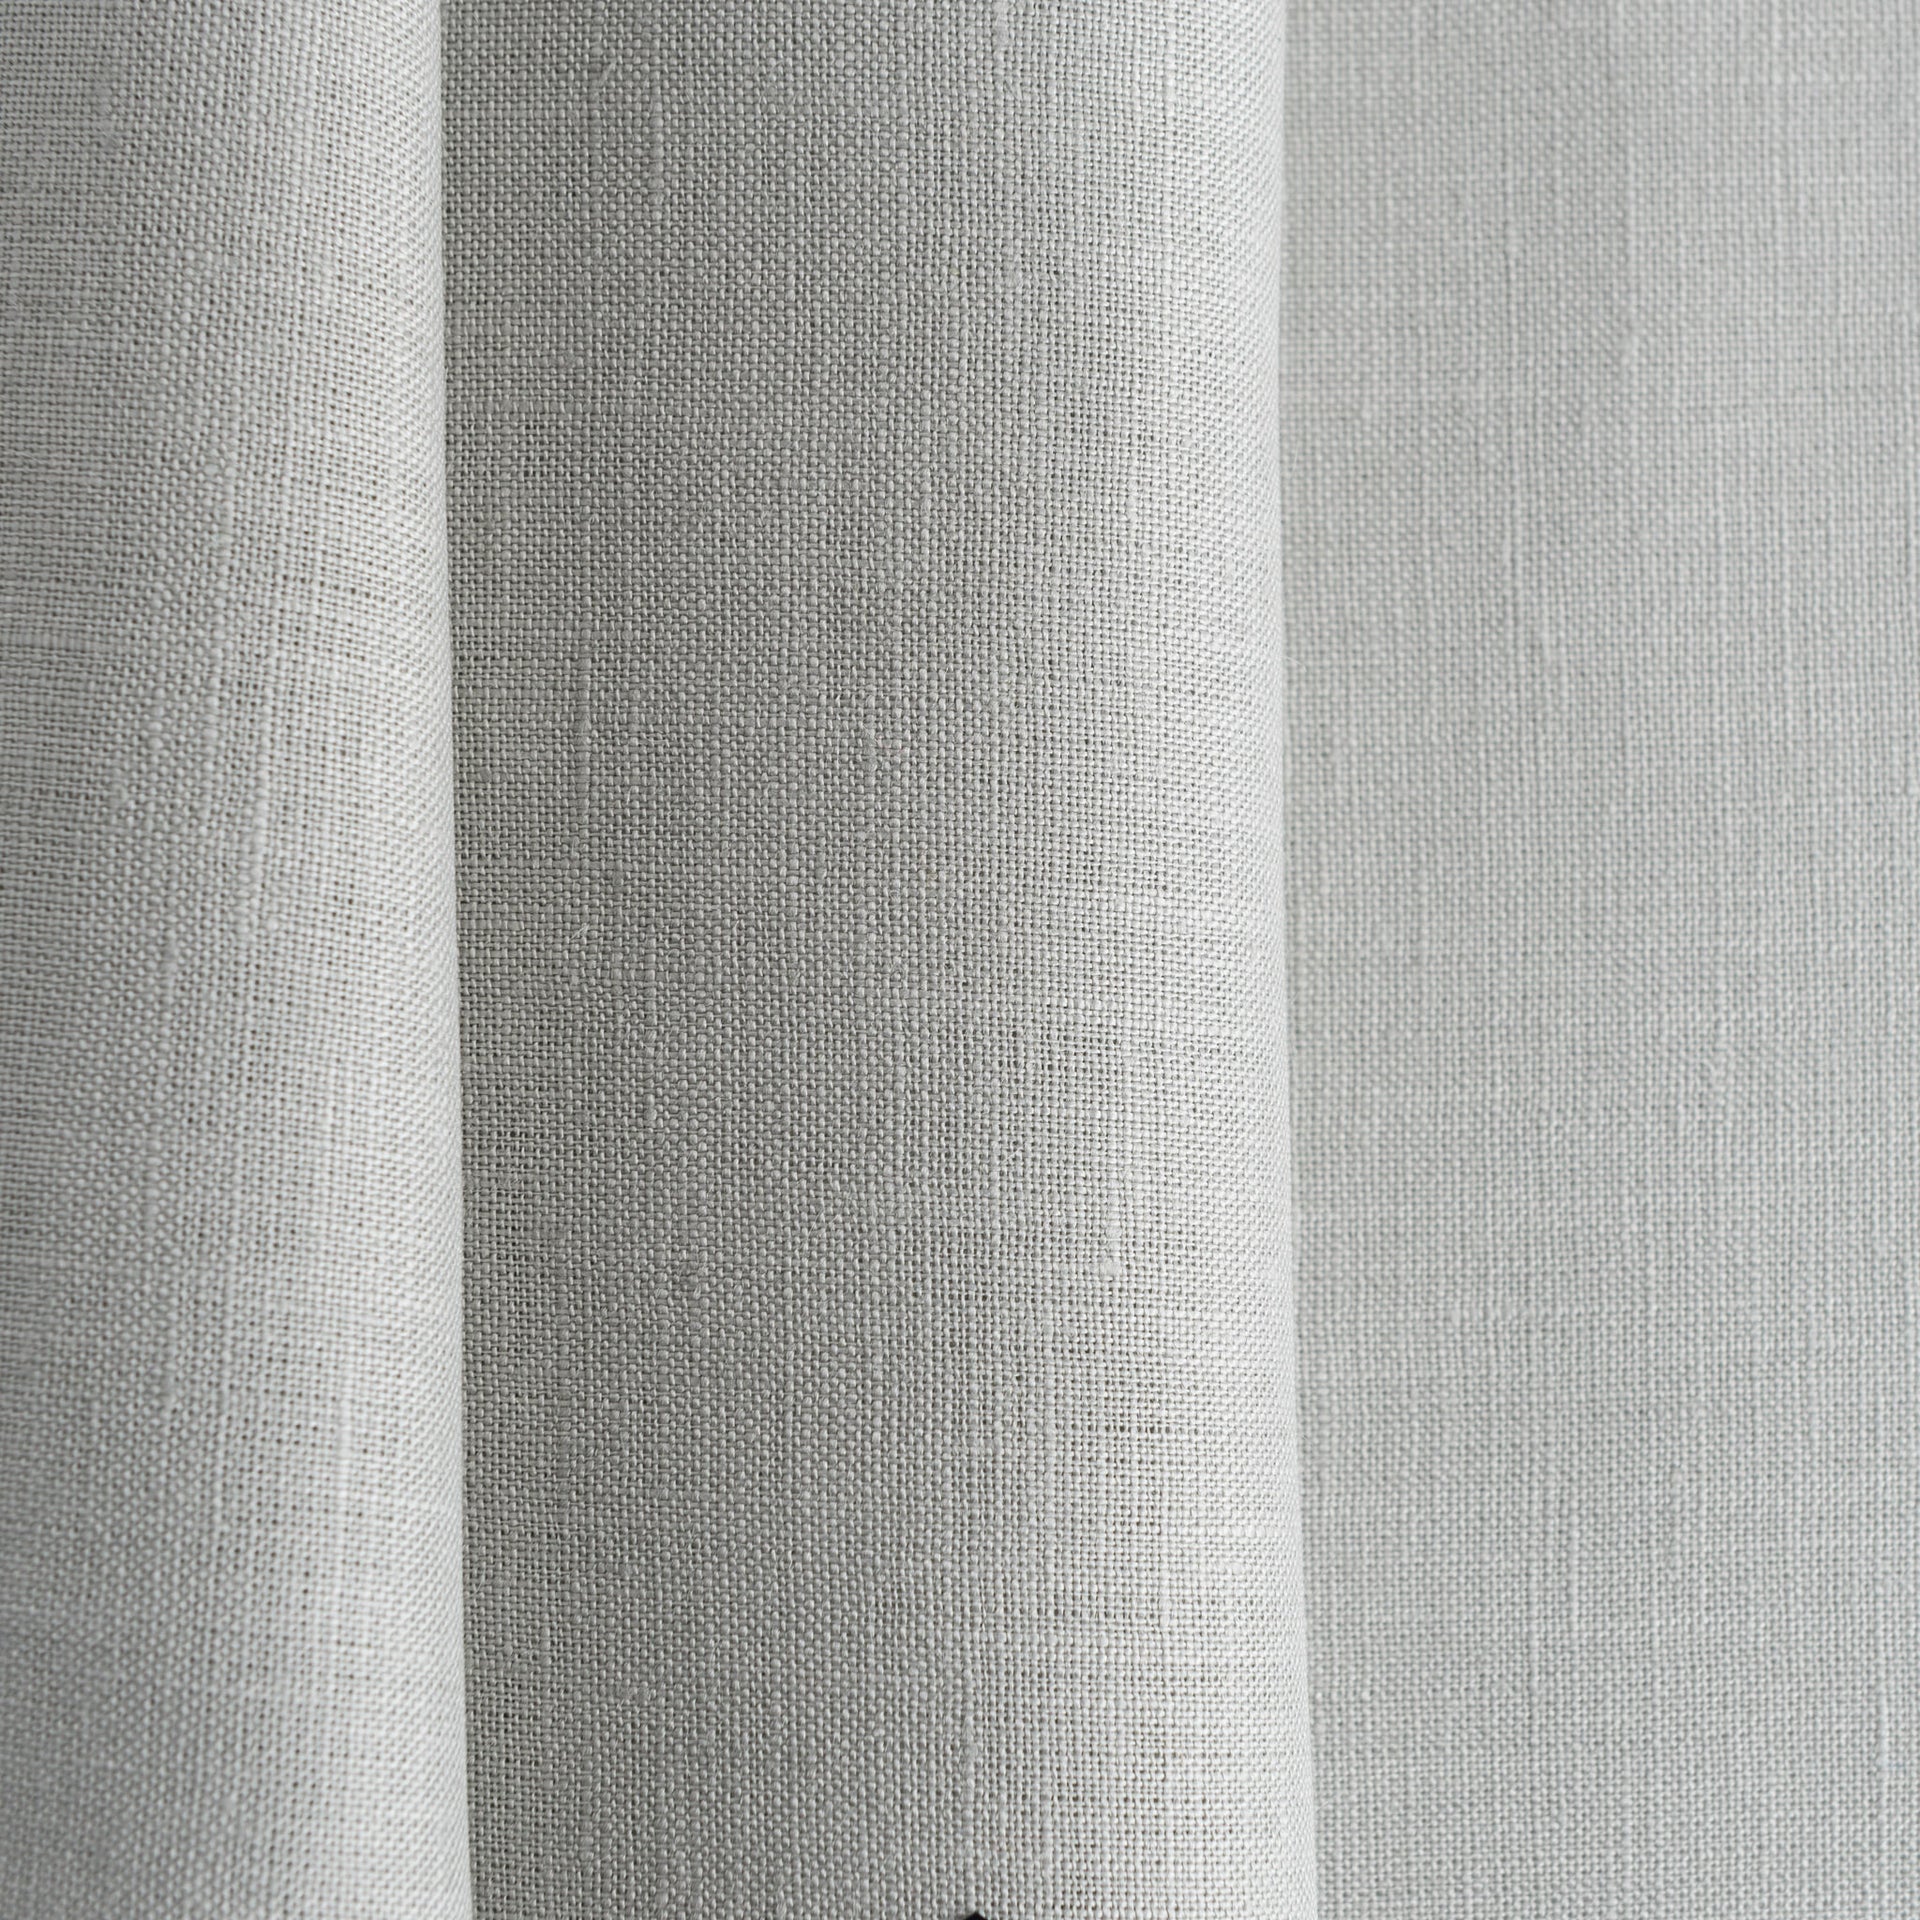 Double Pinch Pleat Grey Linen Curtain Panel - Custom Sizes & Colours, Color: Stone Grey